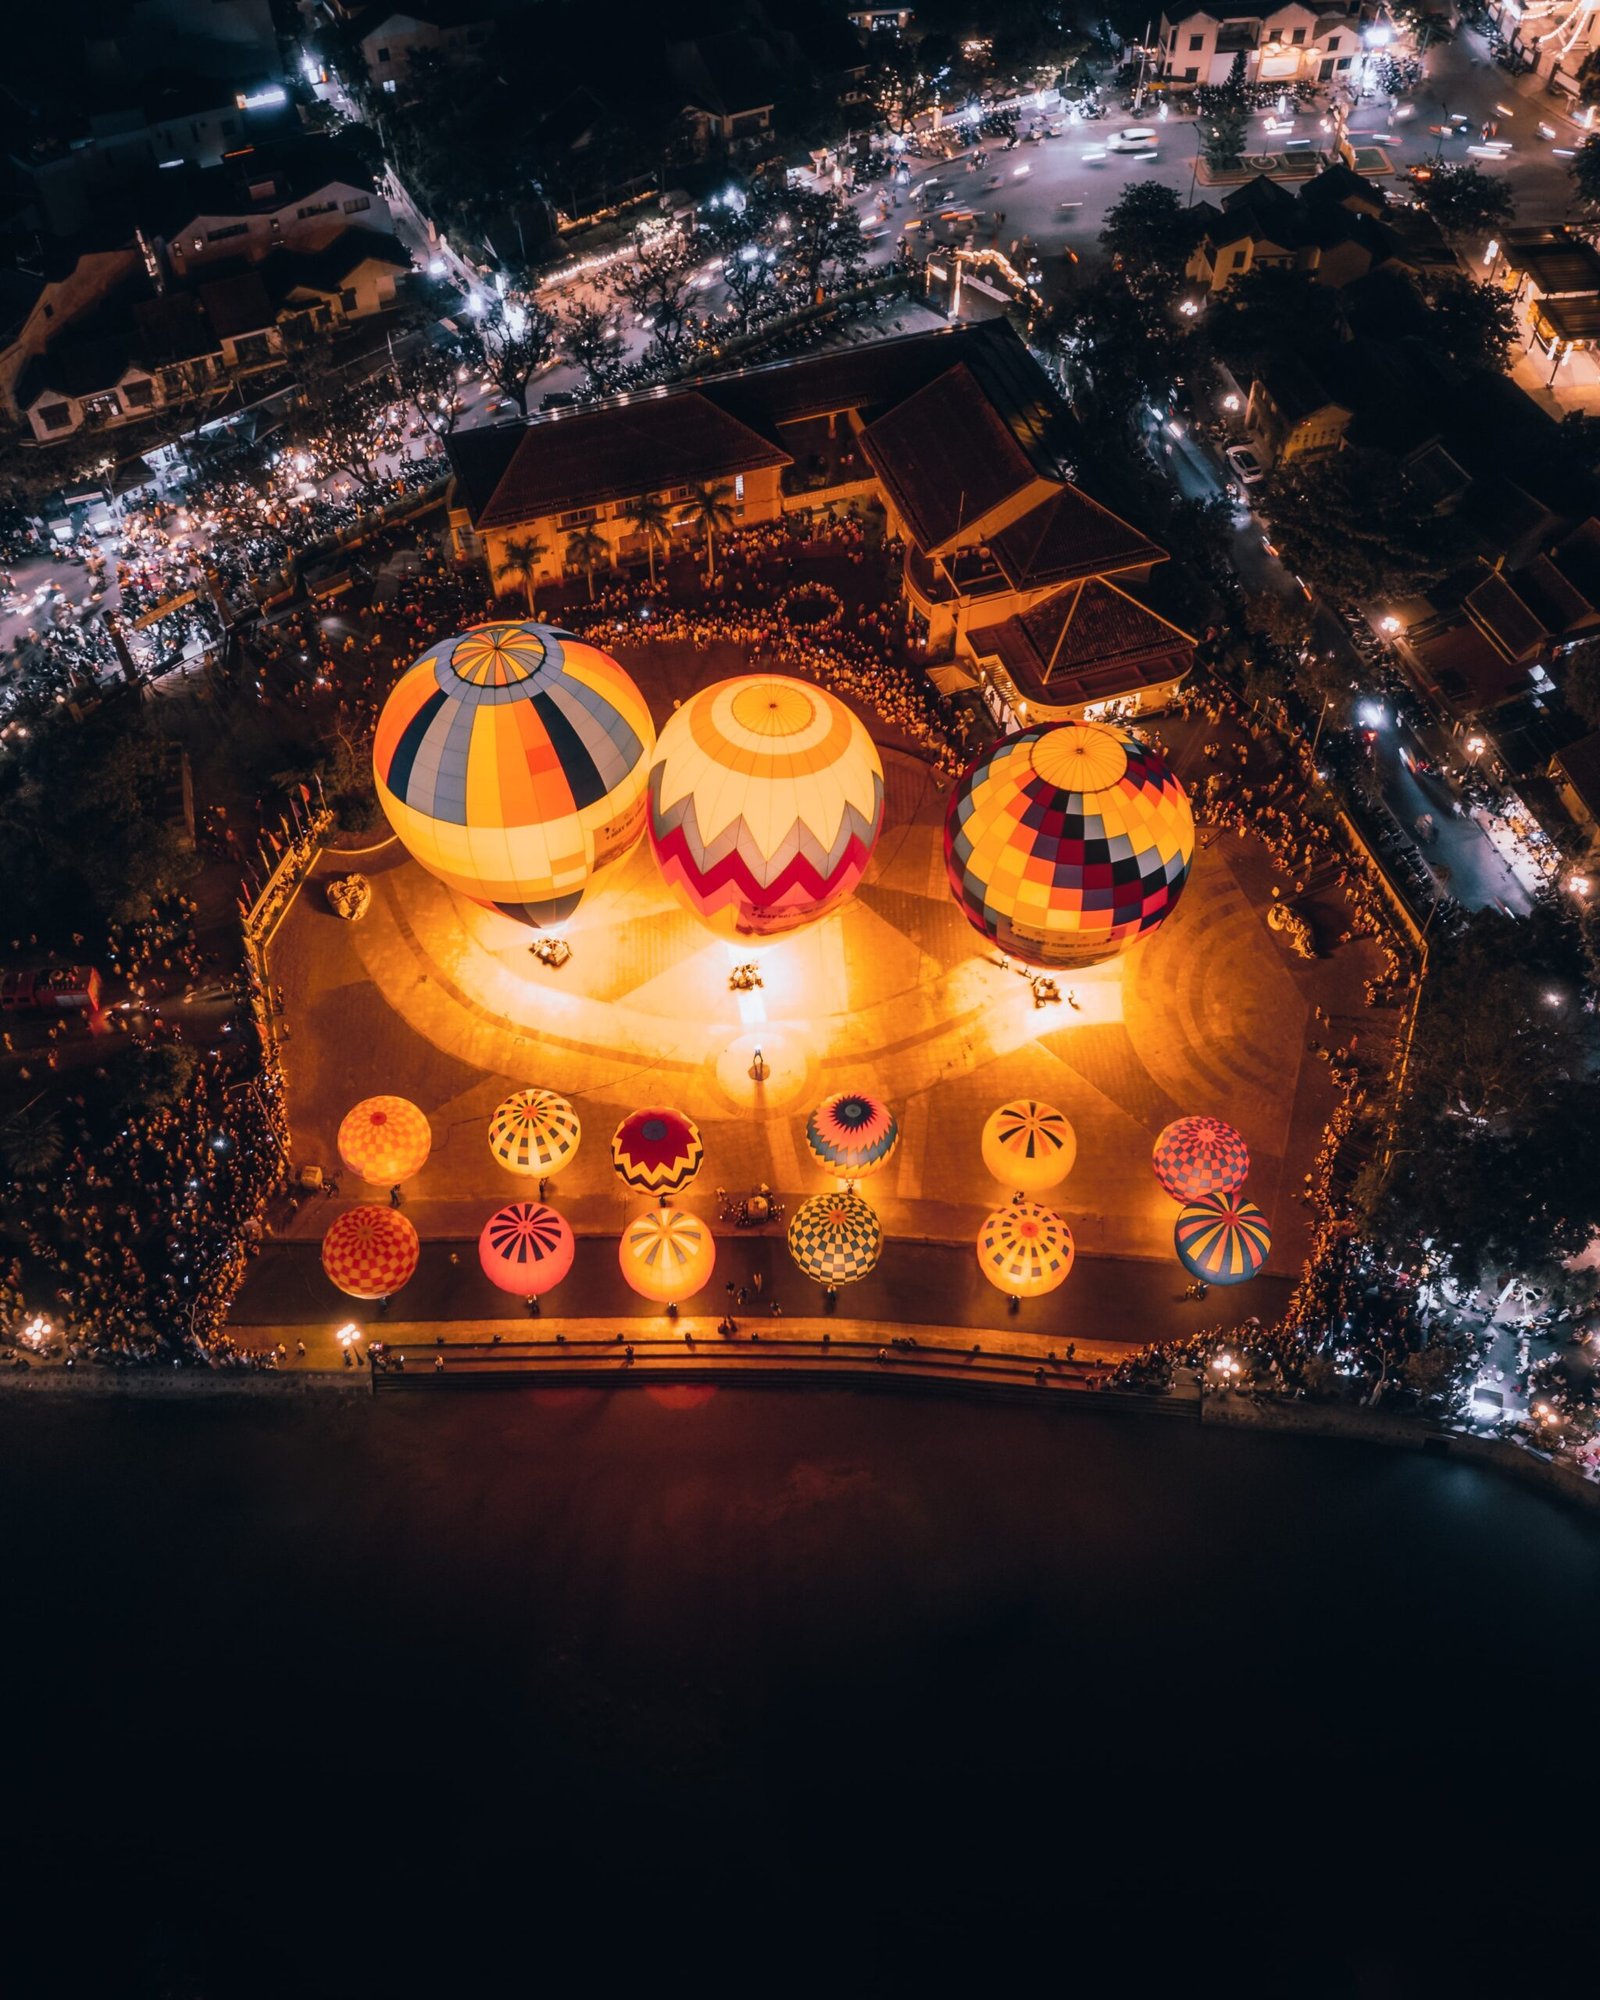 Night drone shot of hot air balloons in Hoi An, Vietnam